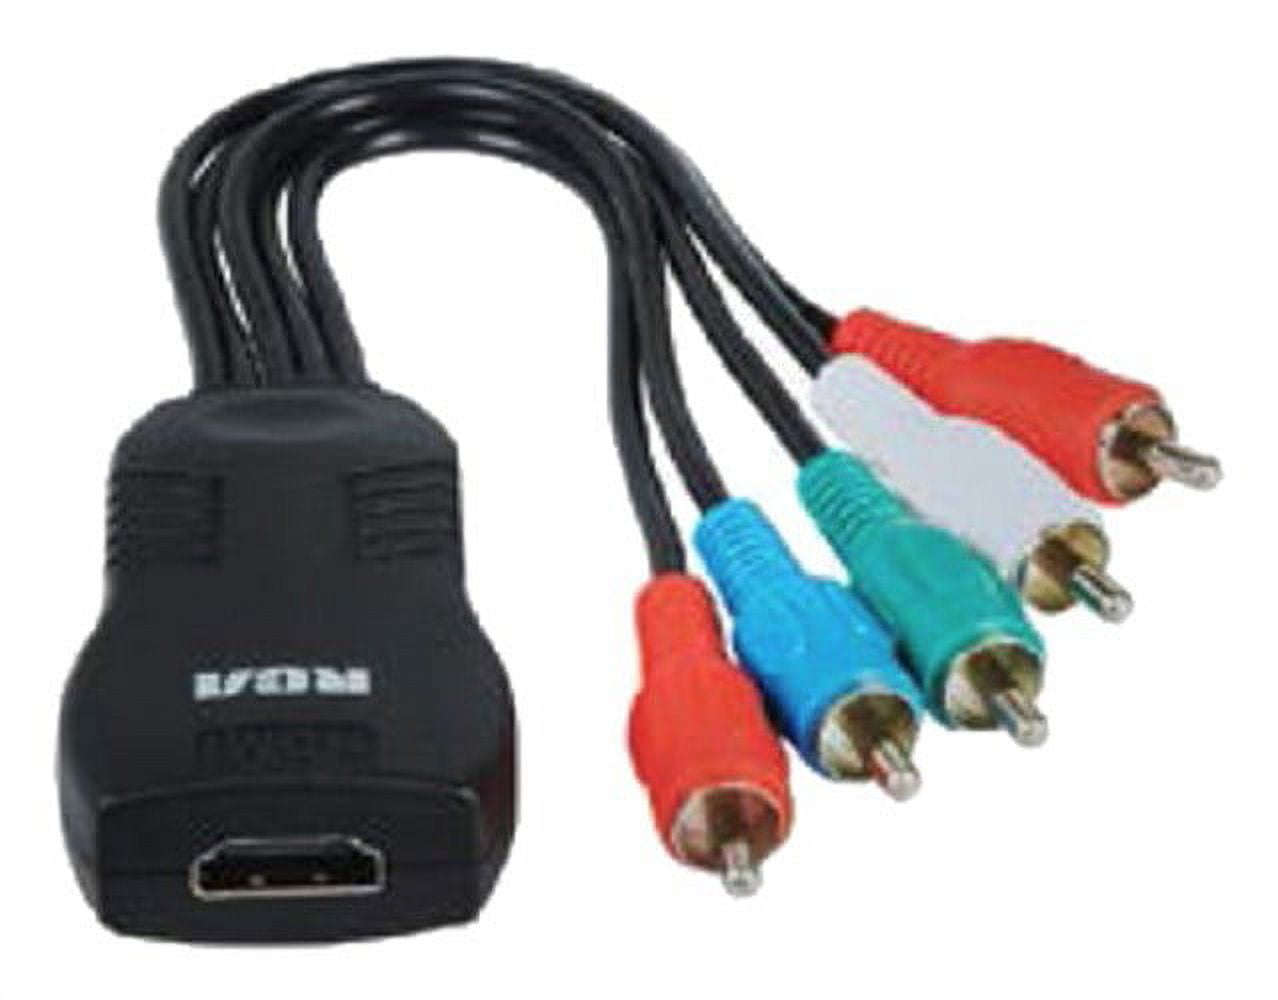 RCA DHCOMF HDMI Composite Adapter